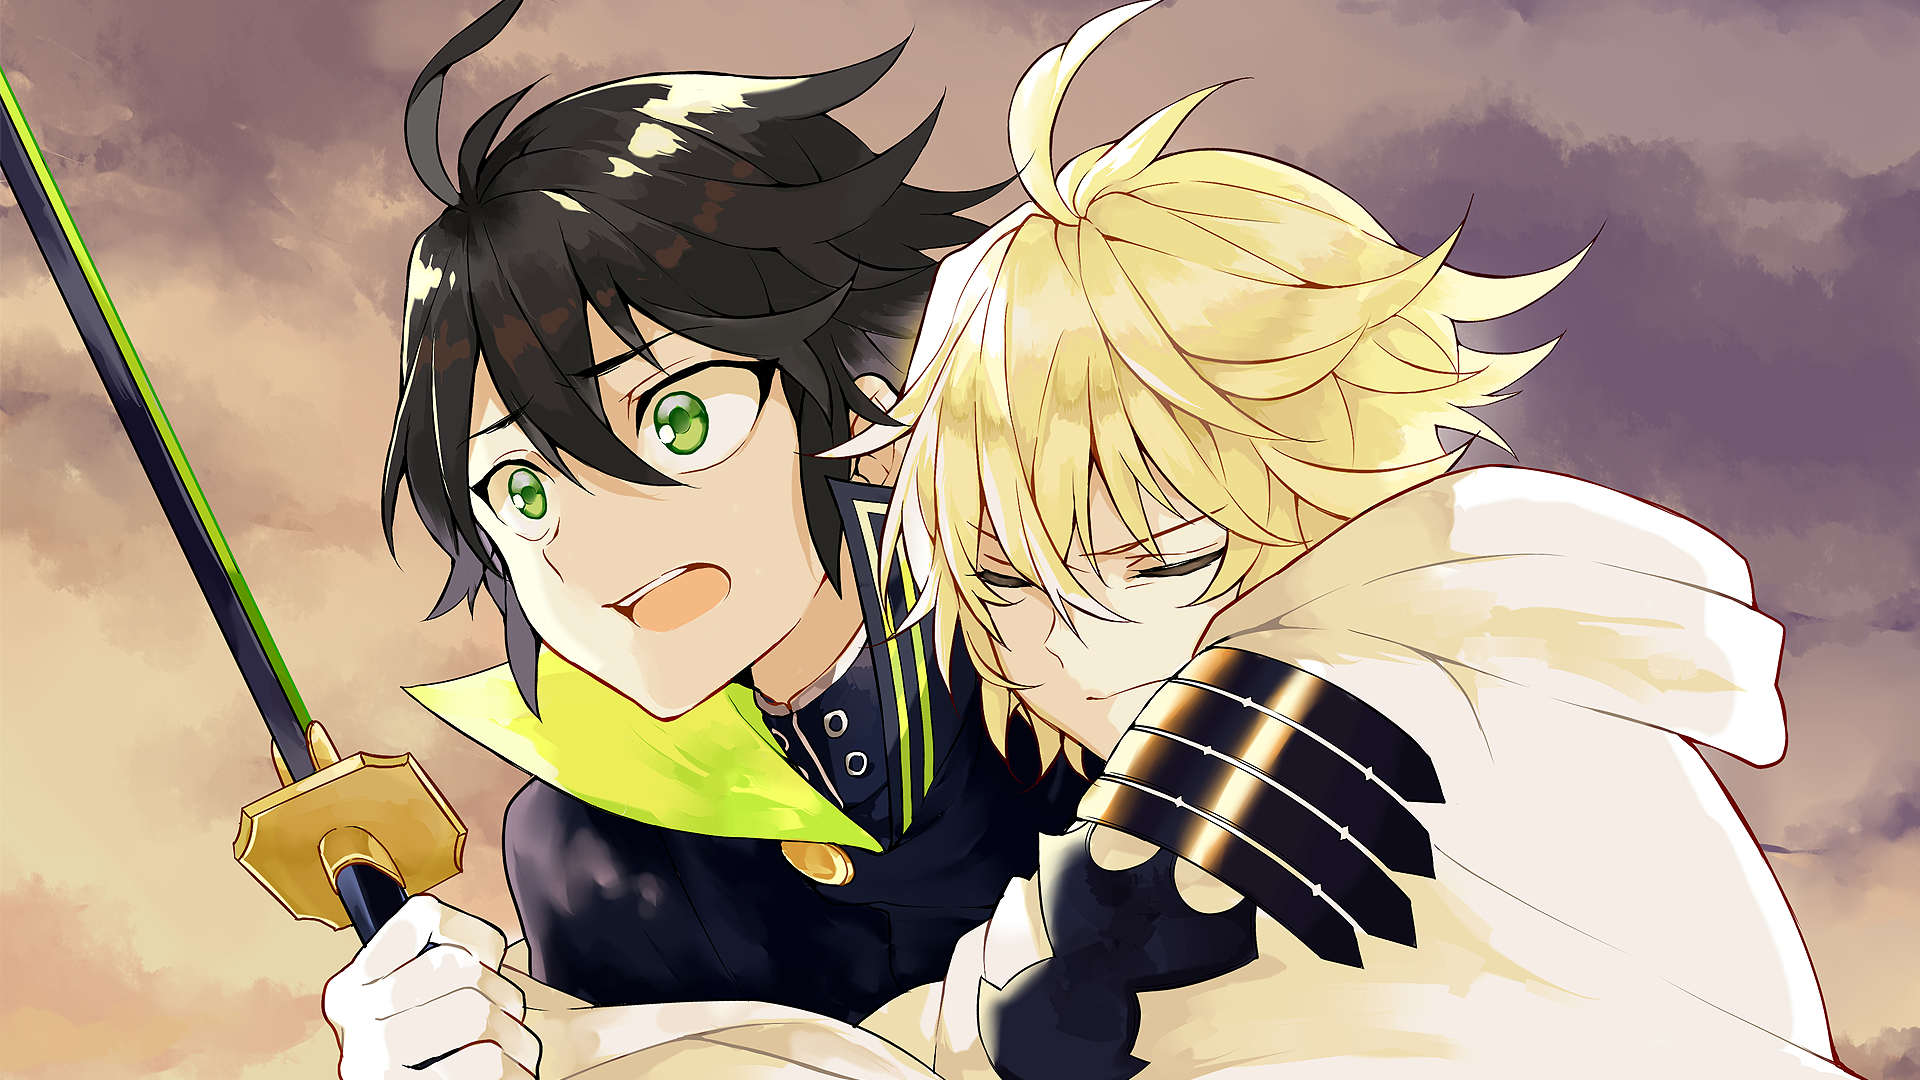 1920x1080 46 Seraph Of The End HD Wallpapers | Backgrounds | Owari no seraph, Mikaela hyakuya, Seraph of the end